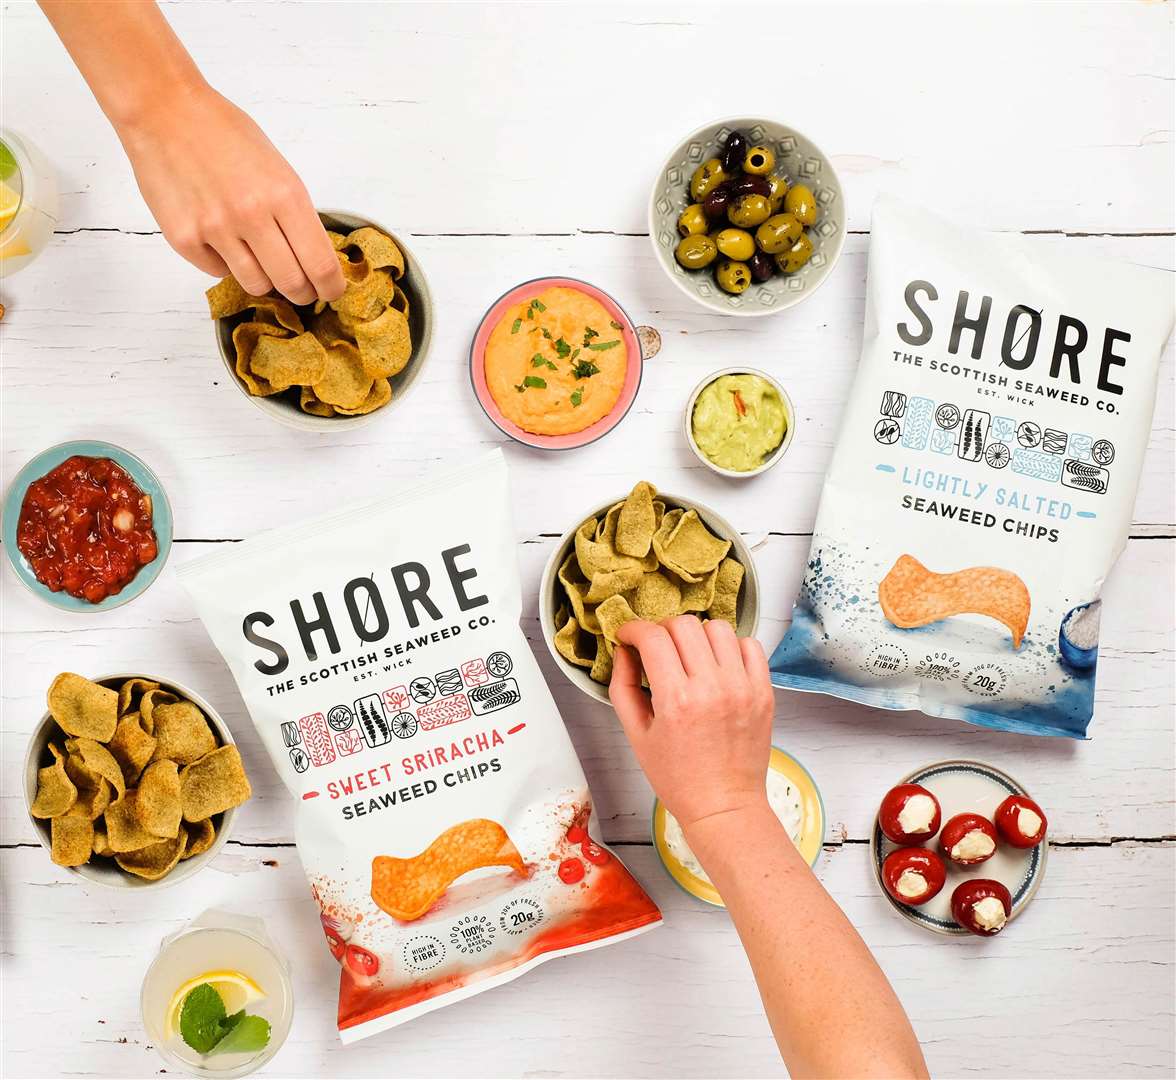 Some of the Shore Seaweed products.